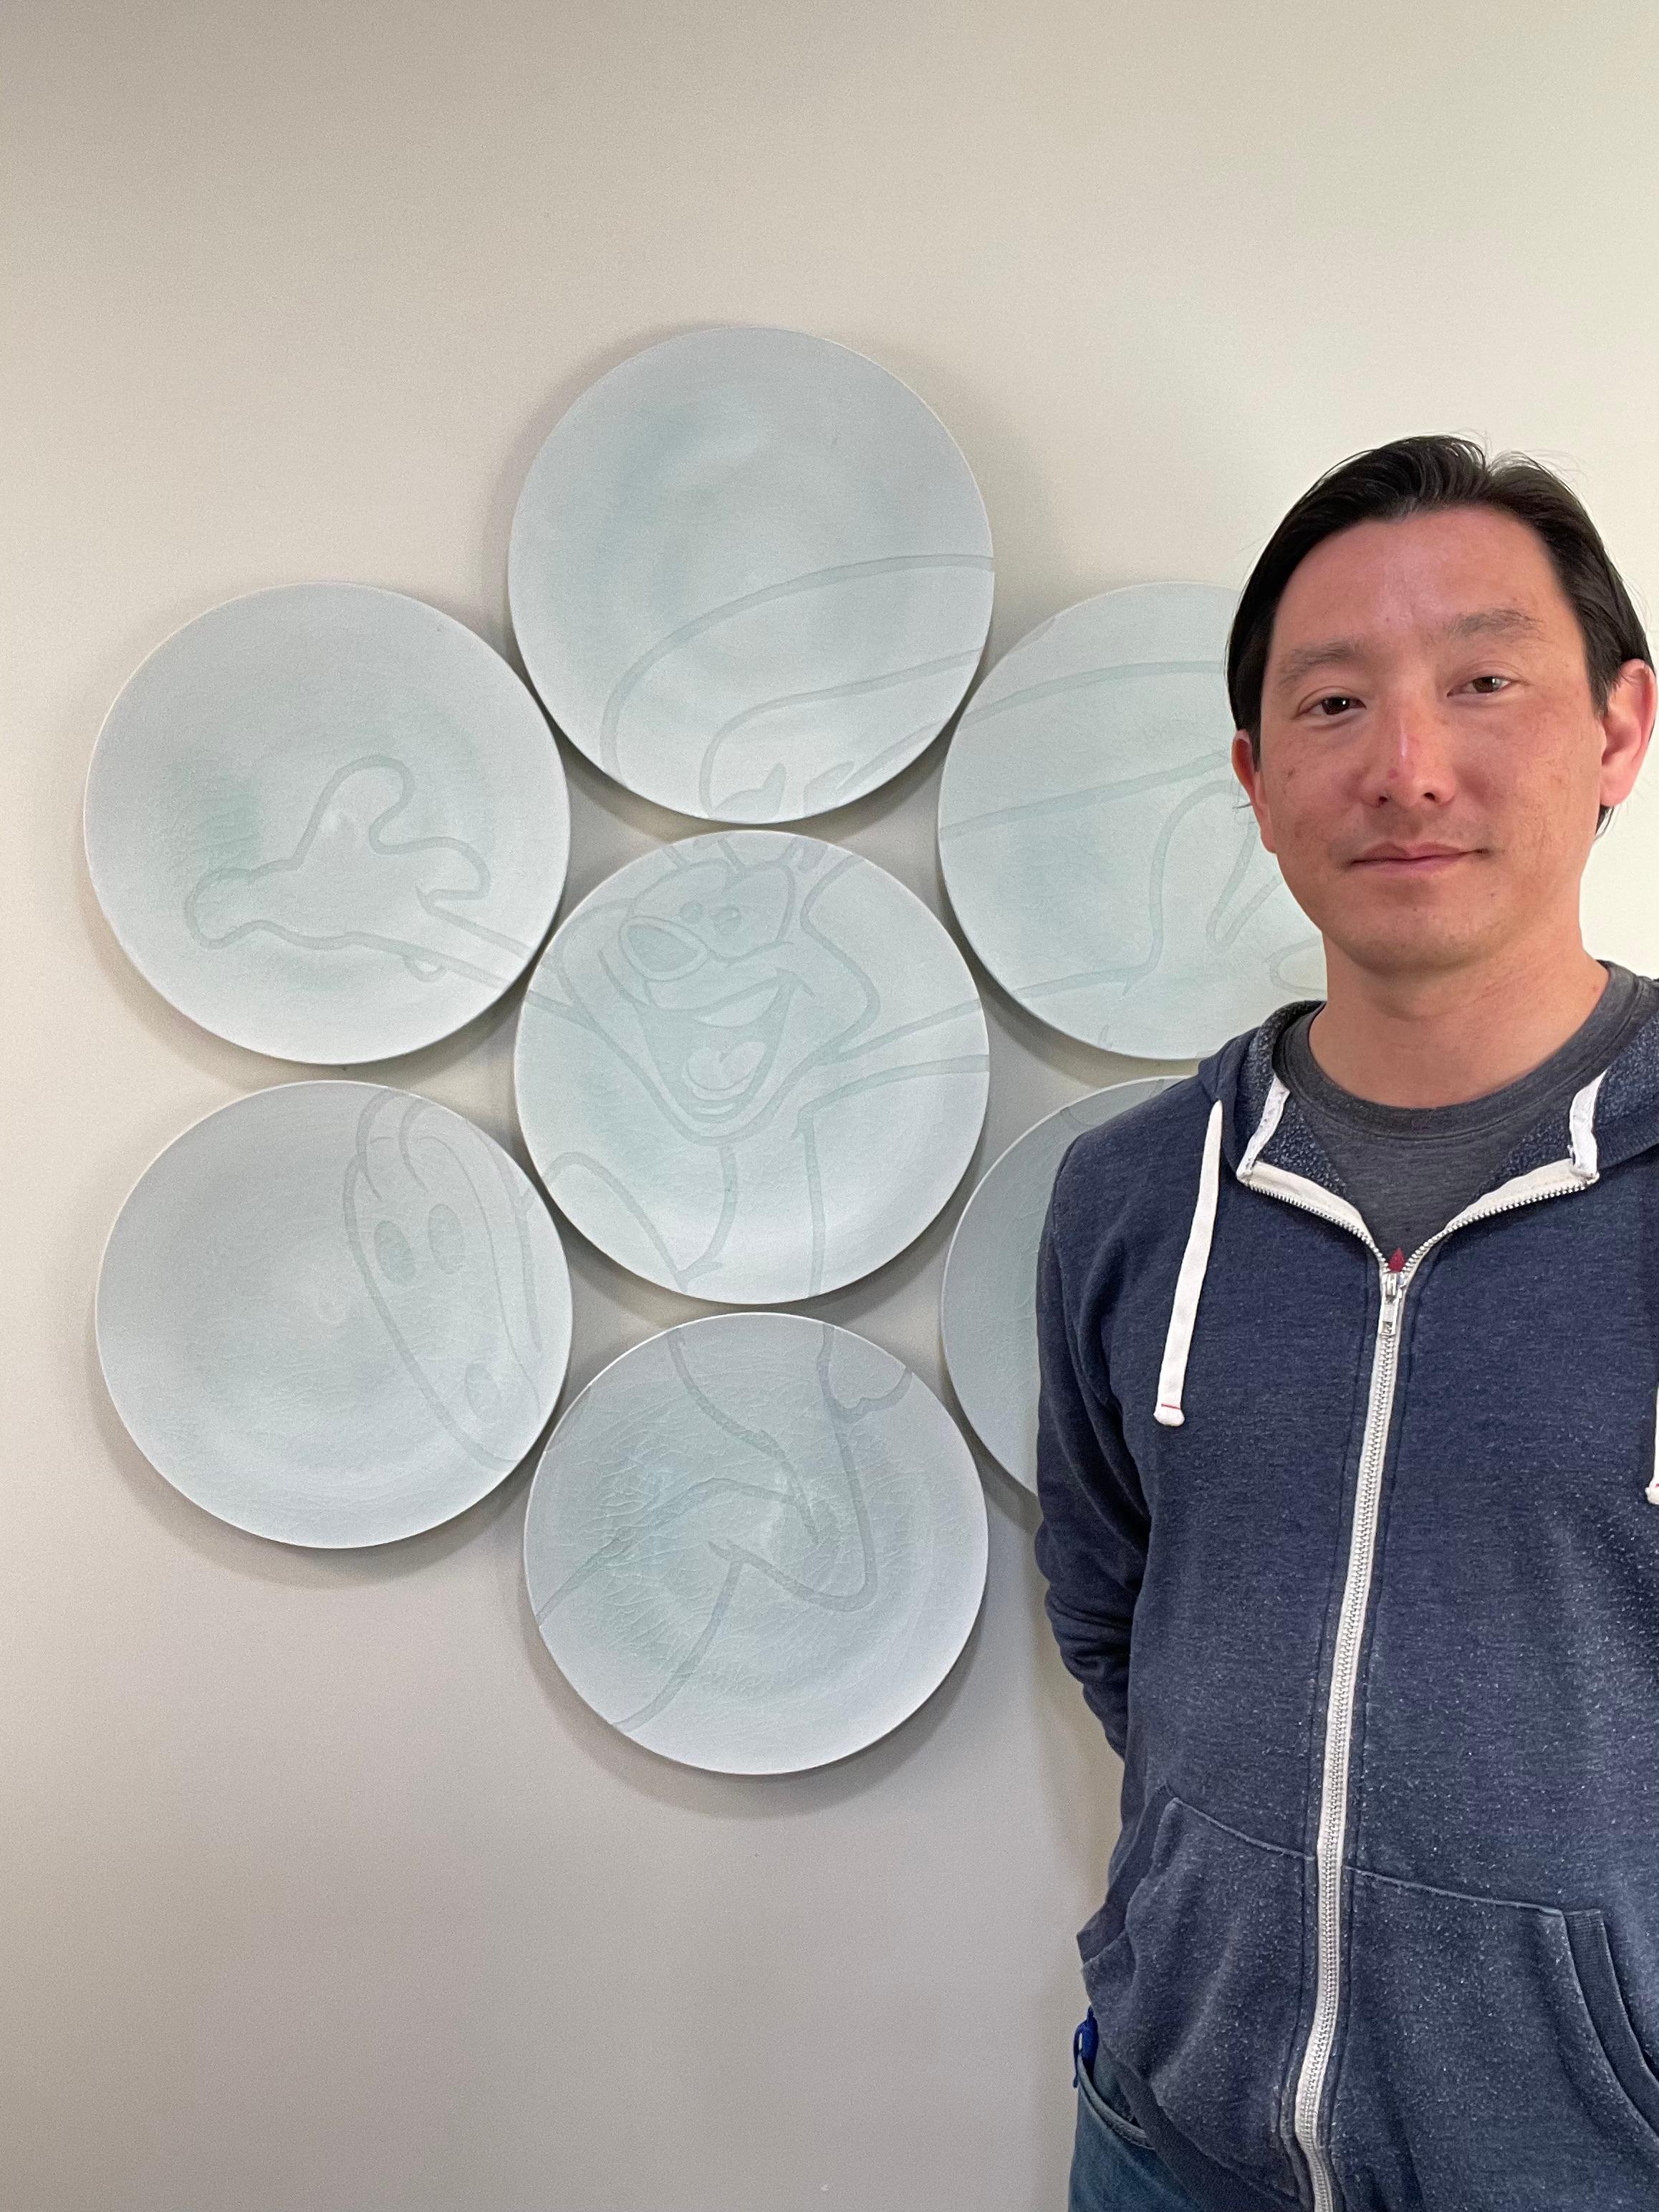 Steven Young Lee is the Resident Artist Director of the Archie Bray Foundation in Helena, Montana. A Chicago native, he received his MFA in Ceramics from the New York State College of Ceramics at Alfred University. He has lectured and taught at